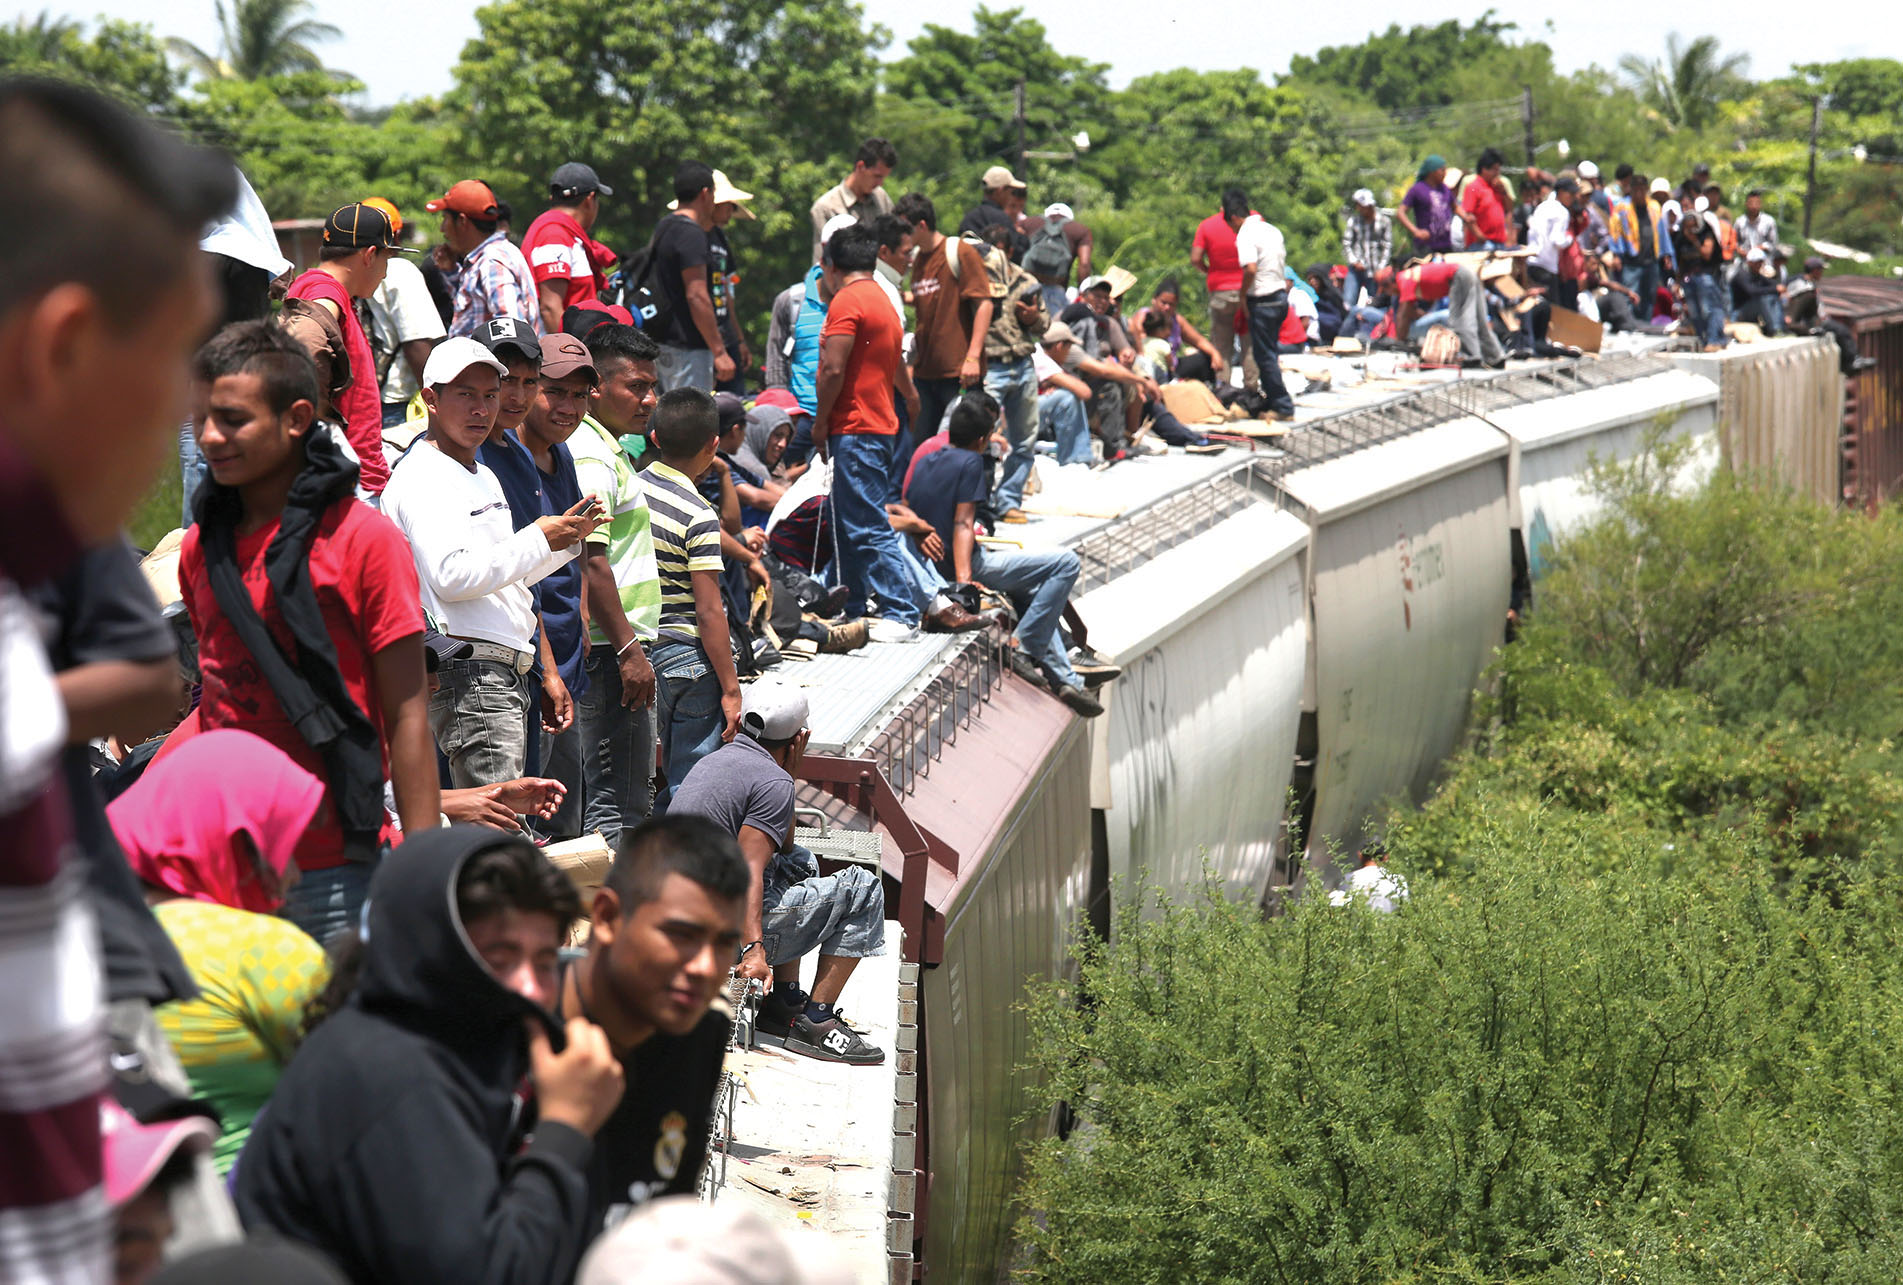 Migrants pass through Ixtepec, Mexico, riding in the open atop freight cars of a train known as “la bestia.” (Photo by John Moore/Getty Images.)